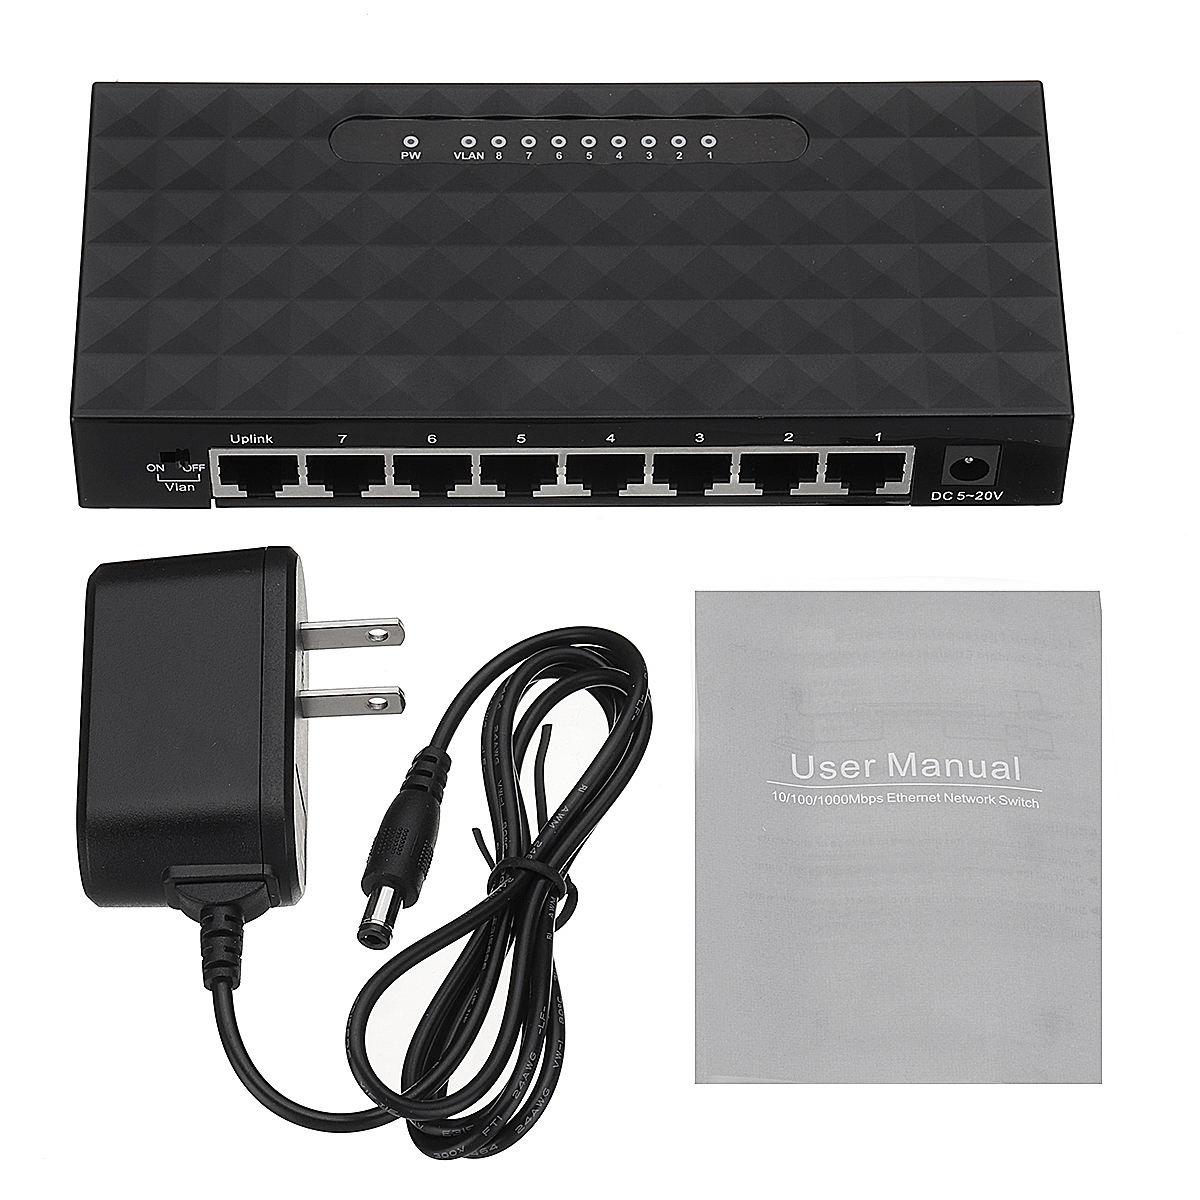 

8-Port RJ45 10/100Mbps Ethernet Network Switch Internet Lan Hub Adapter for Routers Modems